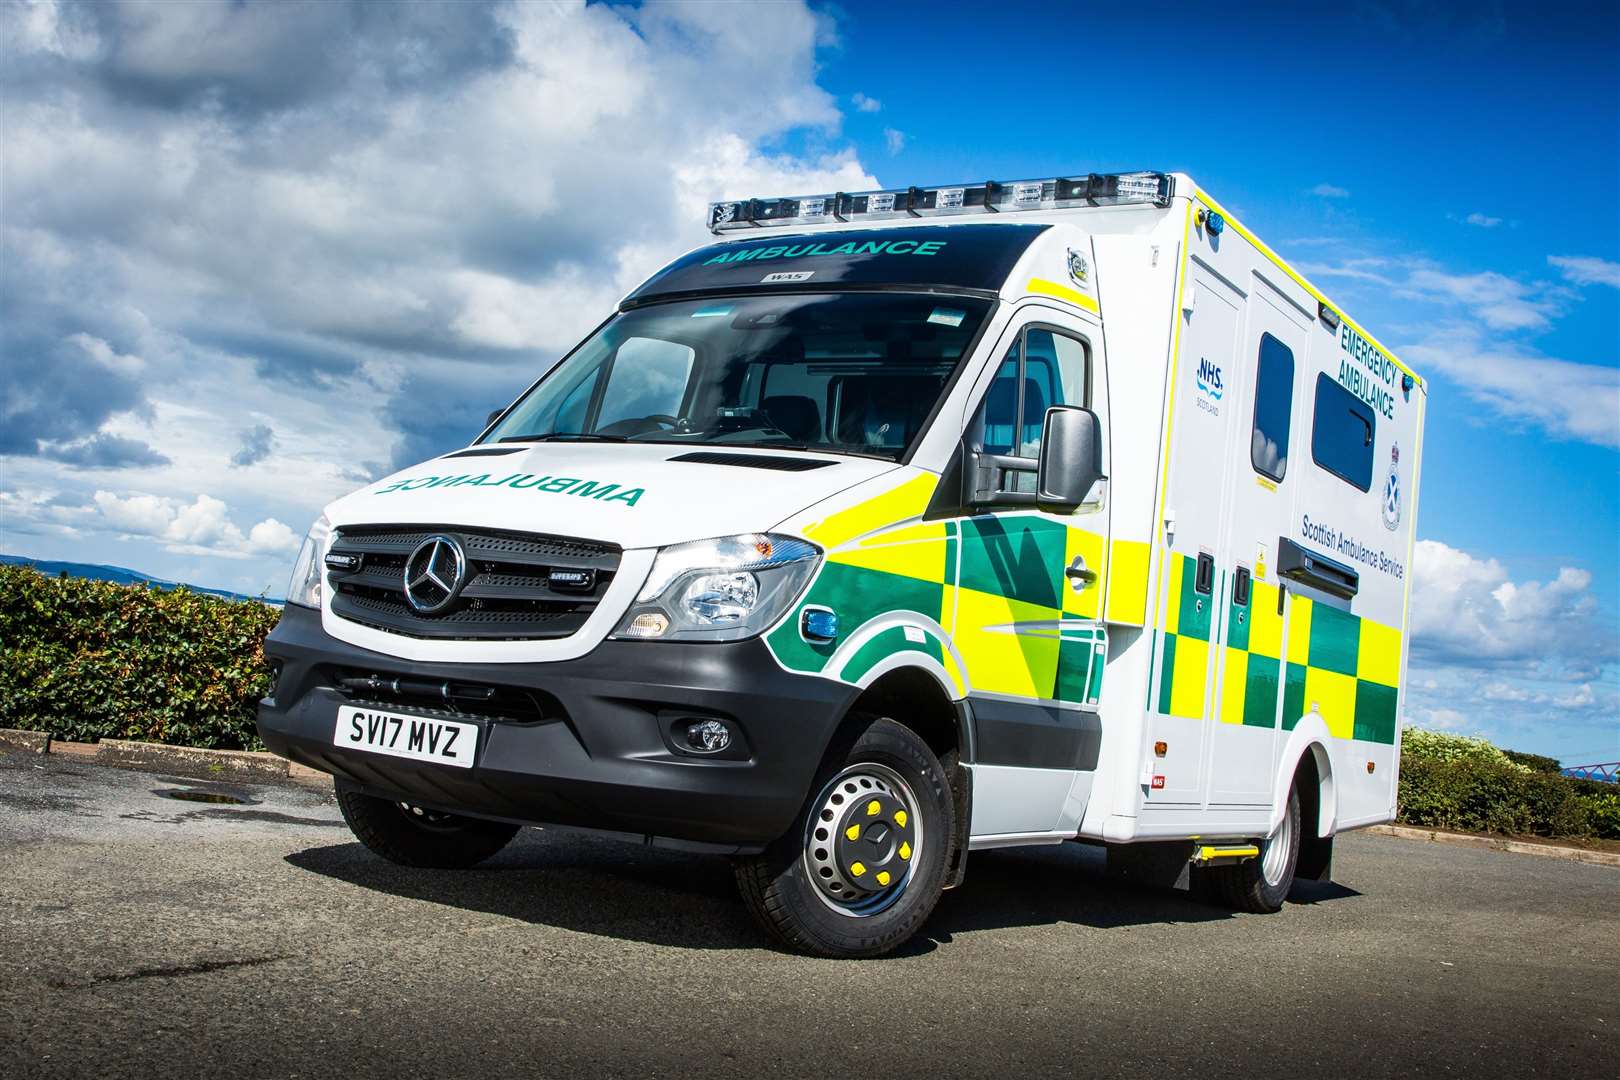 Ambulance crews will be based at Golspie on a full-time basis in the future.